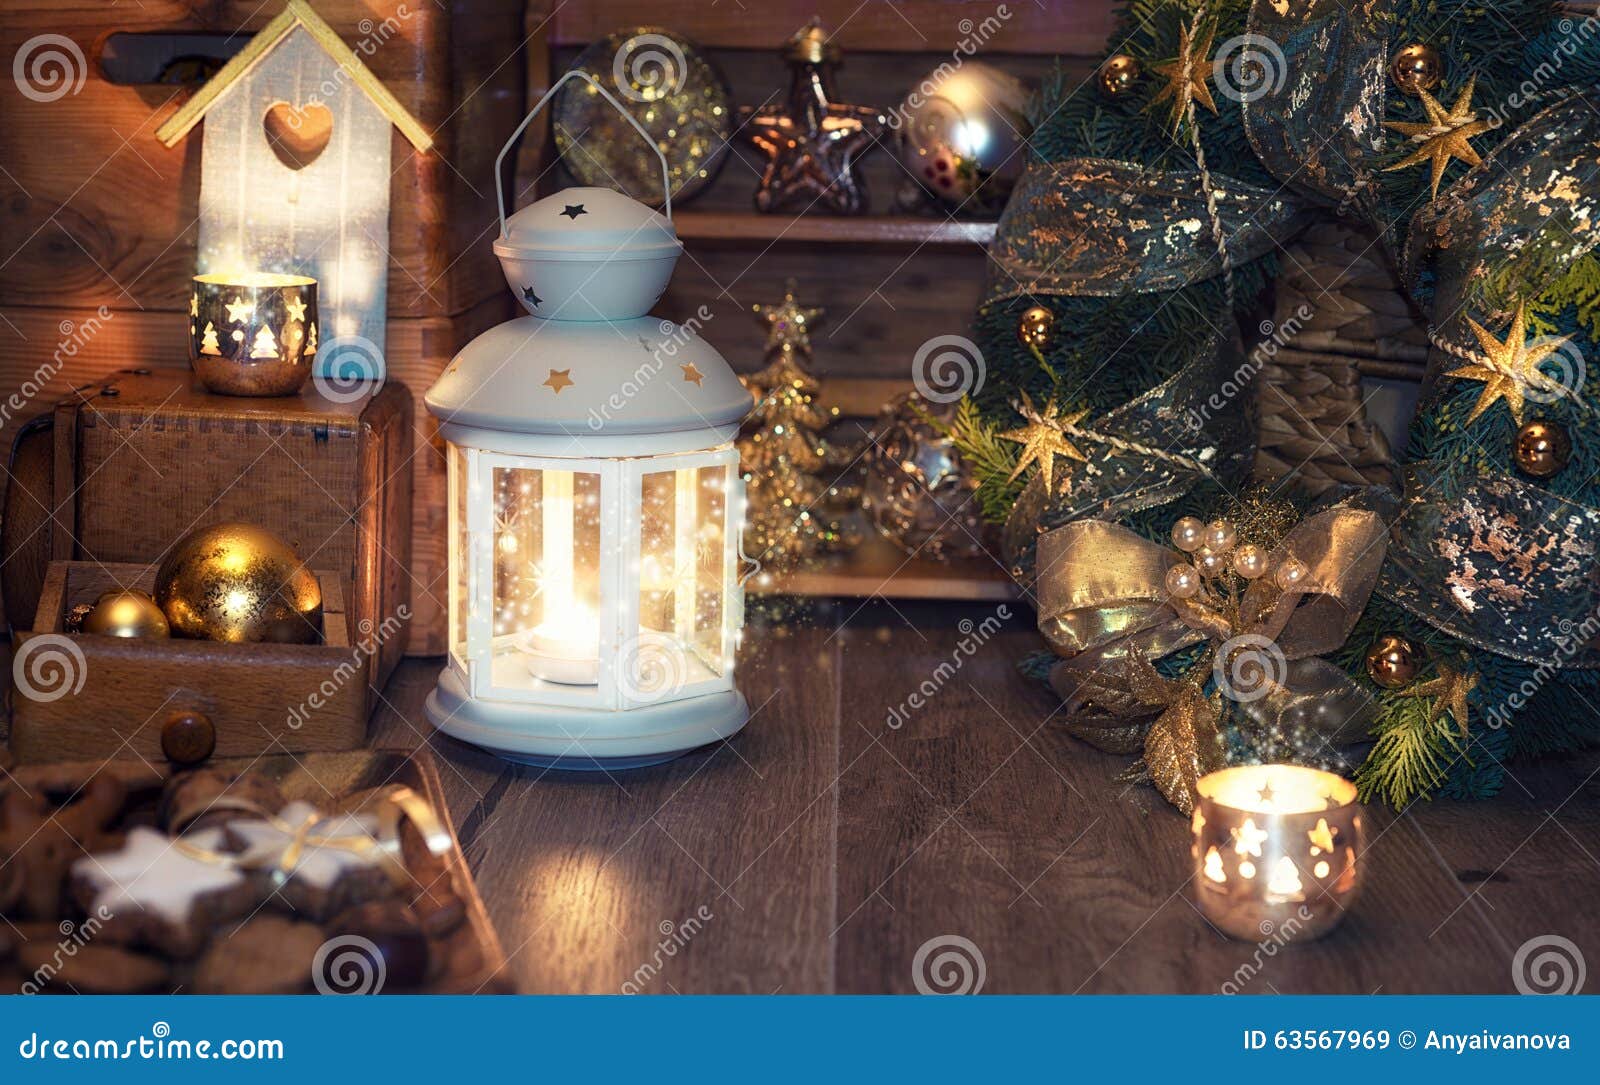 Candles and Christmas Decorations on Vintage Kitchen Stock Image ...